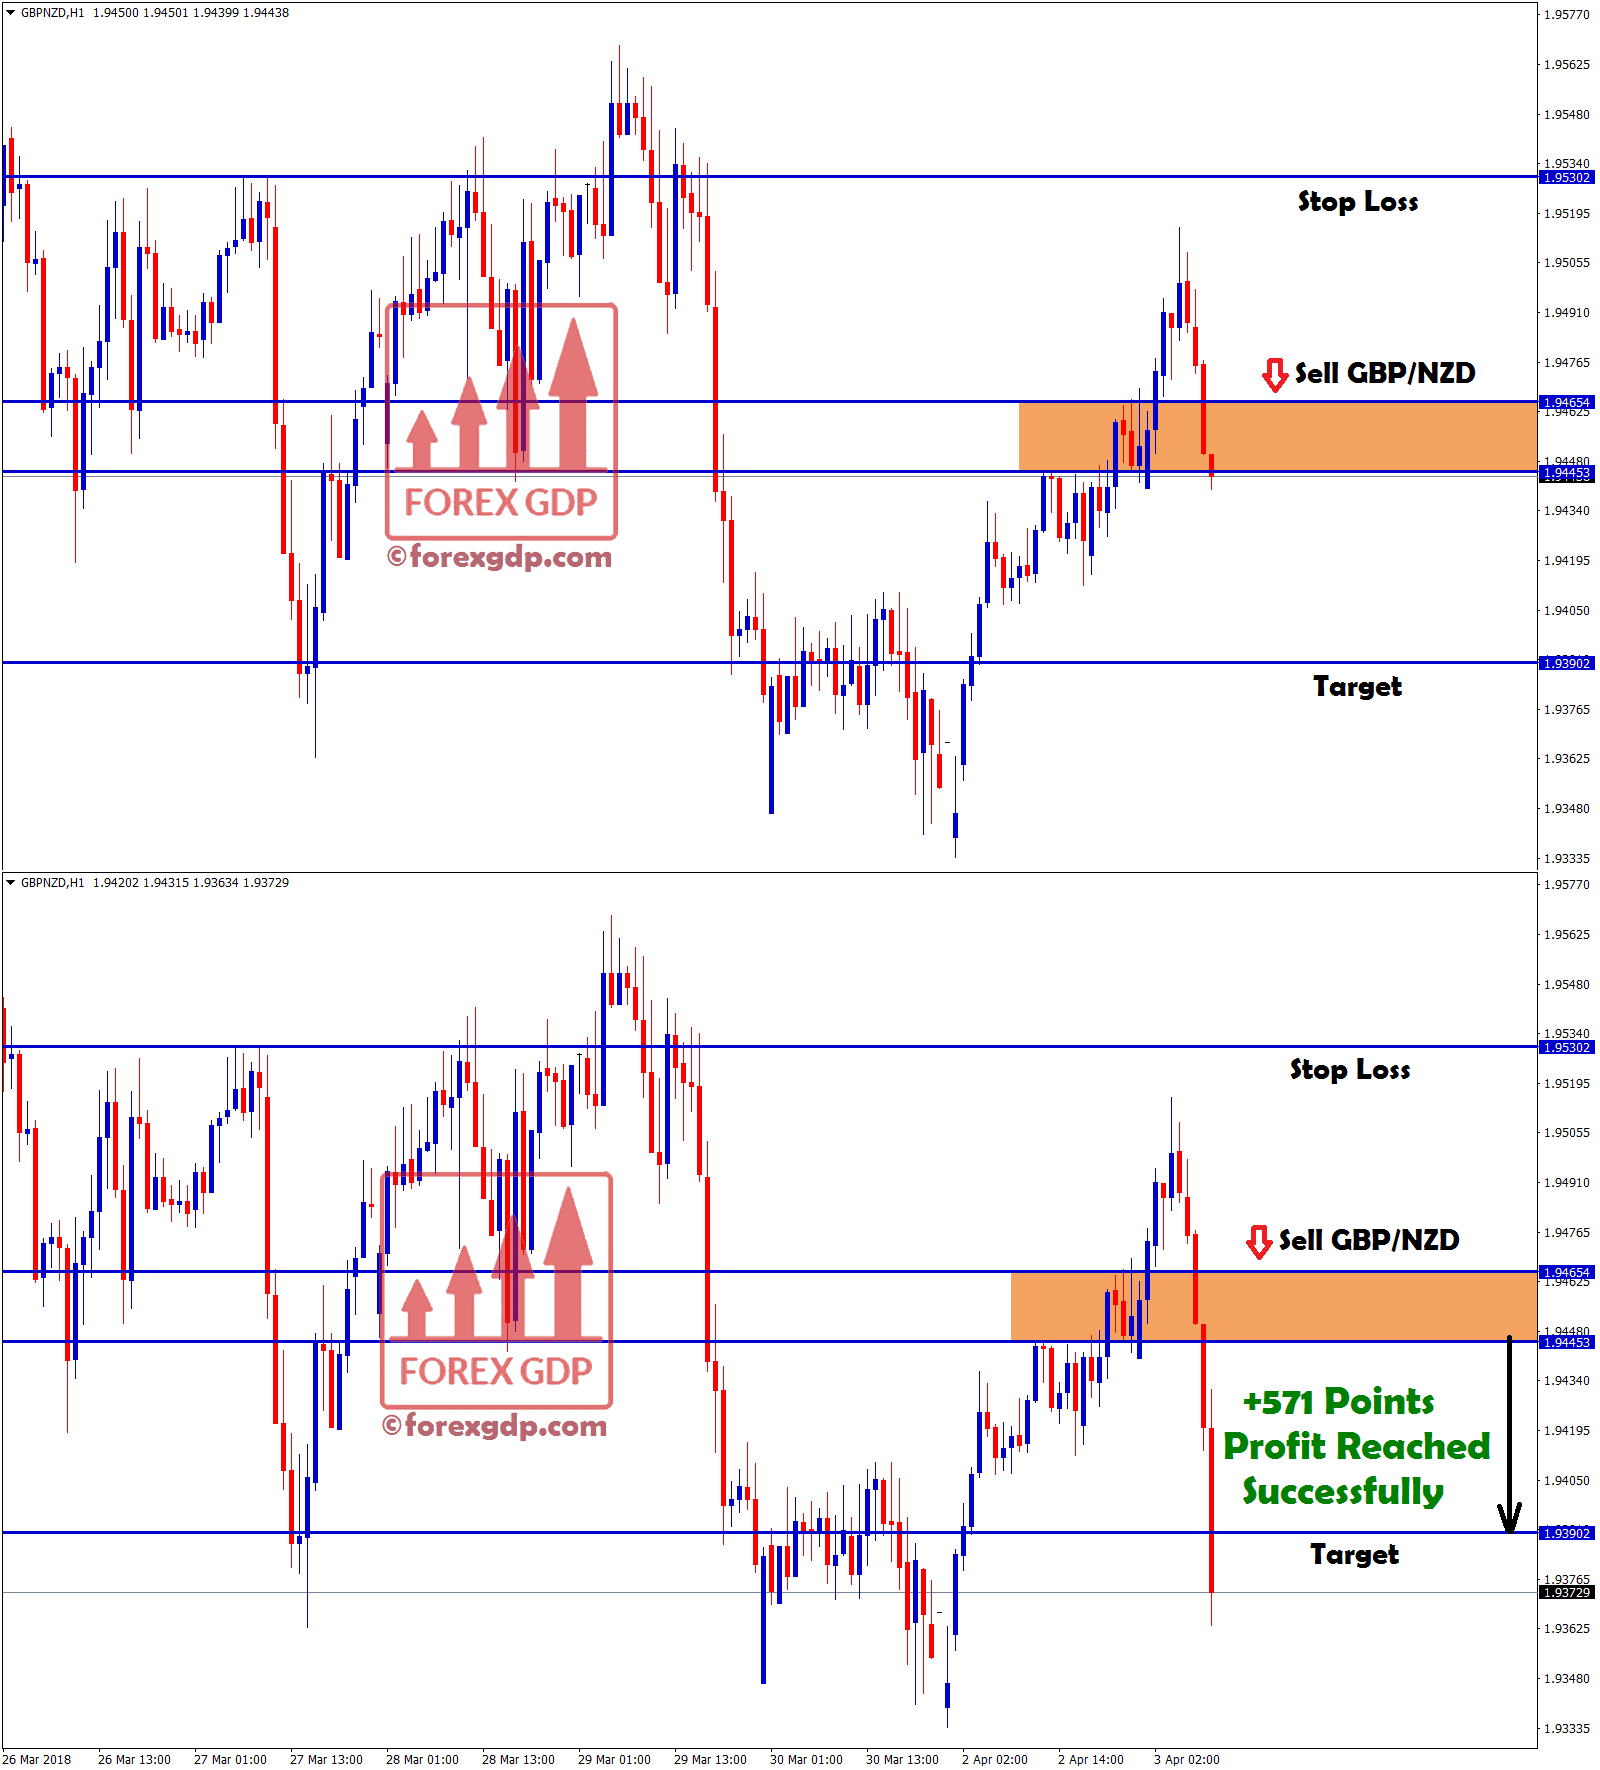 gbp nzd sell signal hits target with +571 points profit